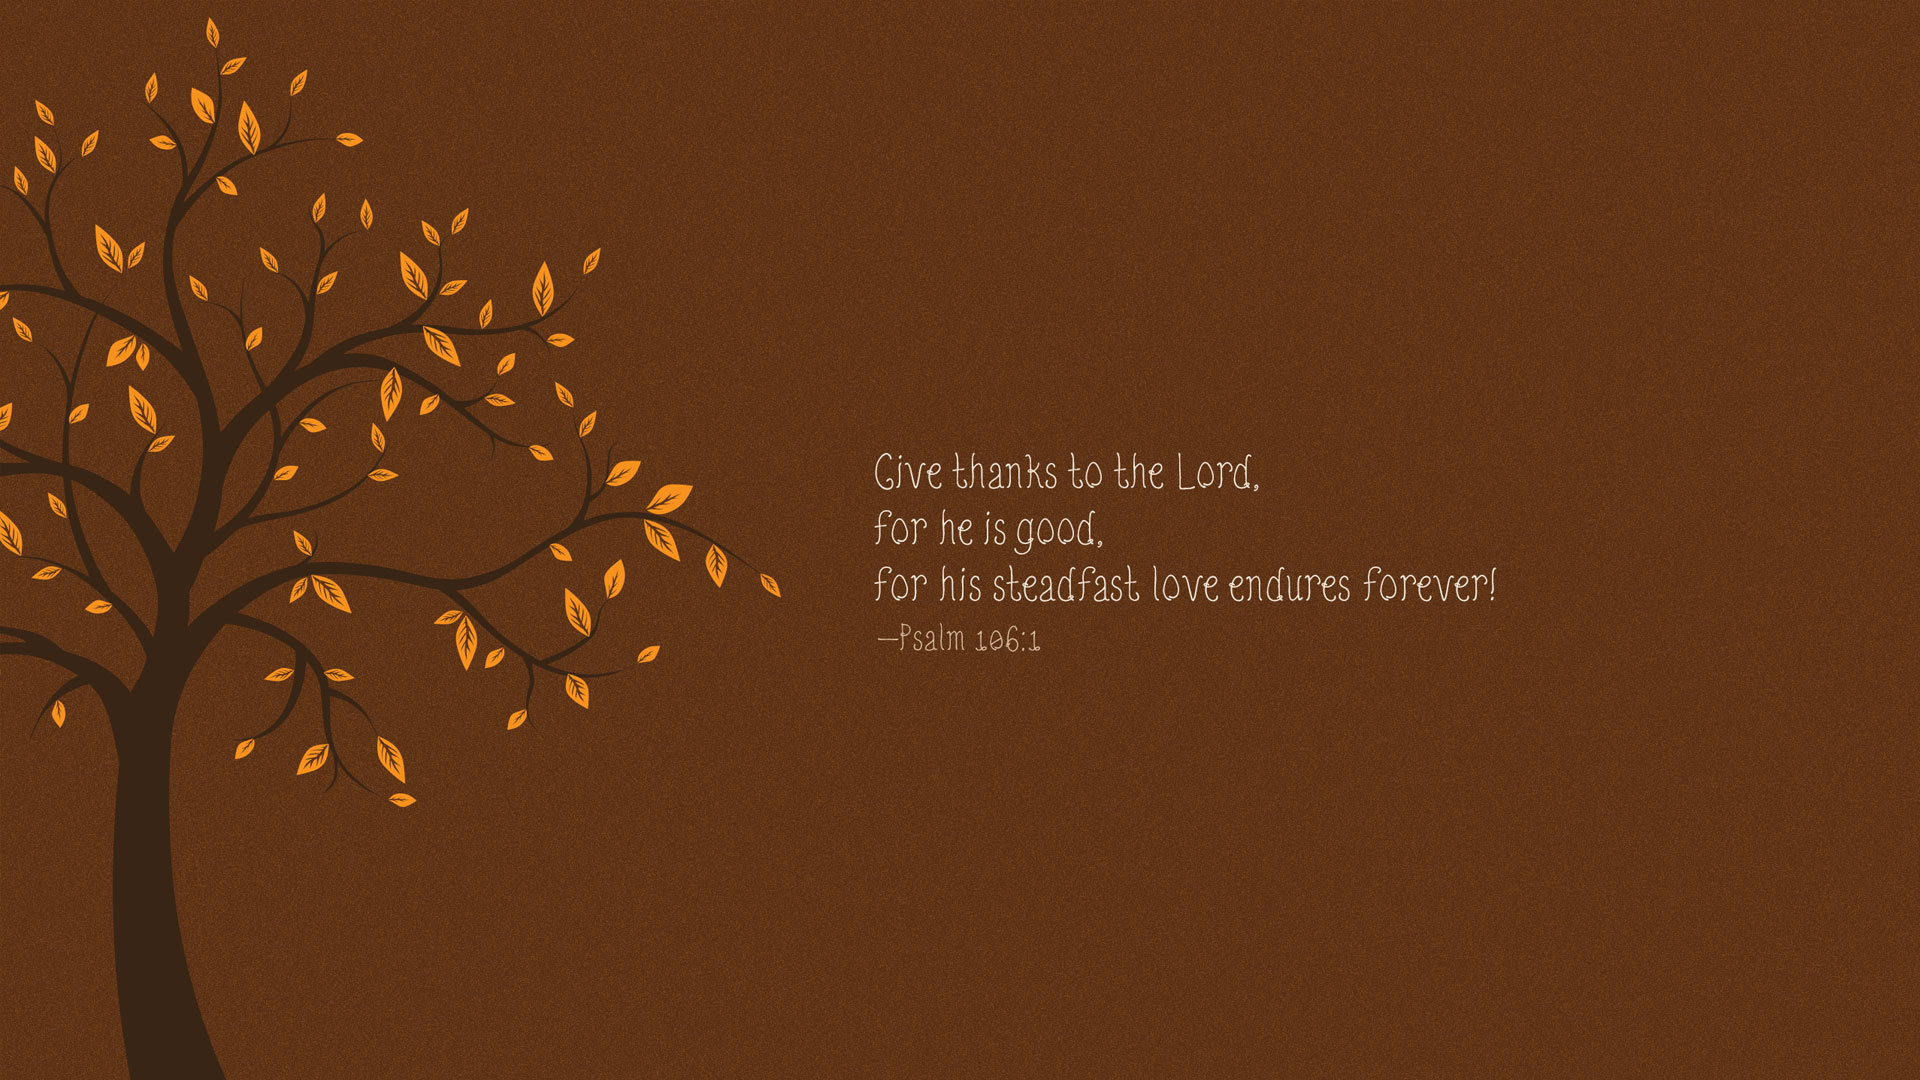 Best Give Thanks To The Lord Wallpaper